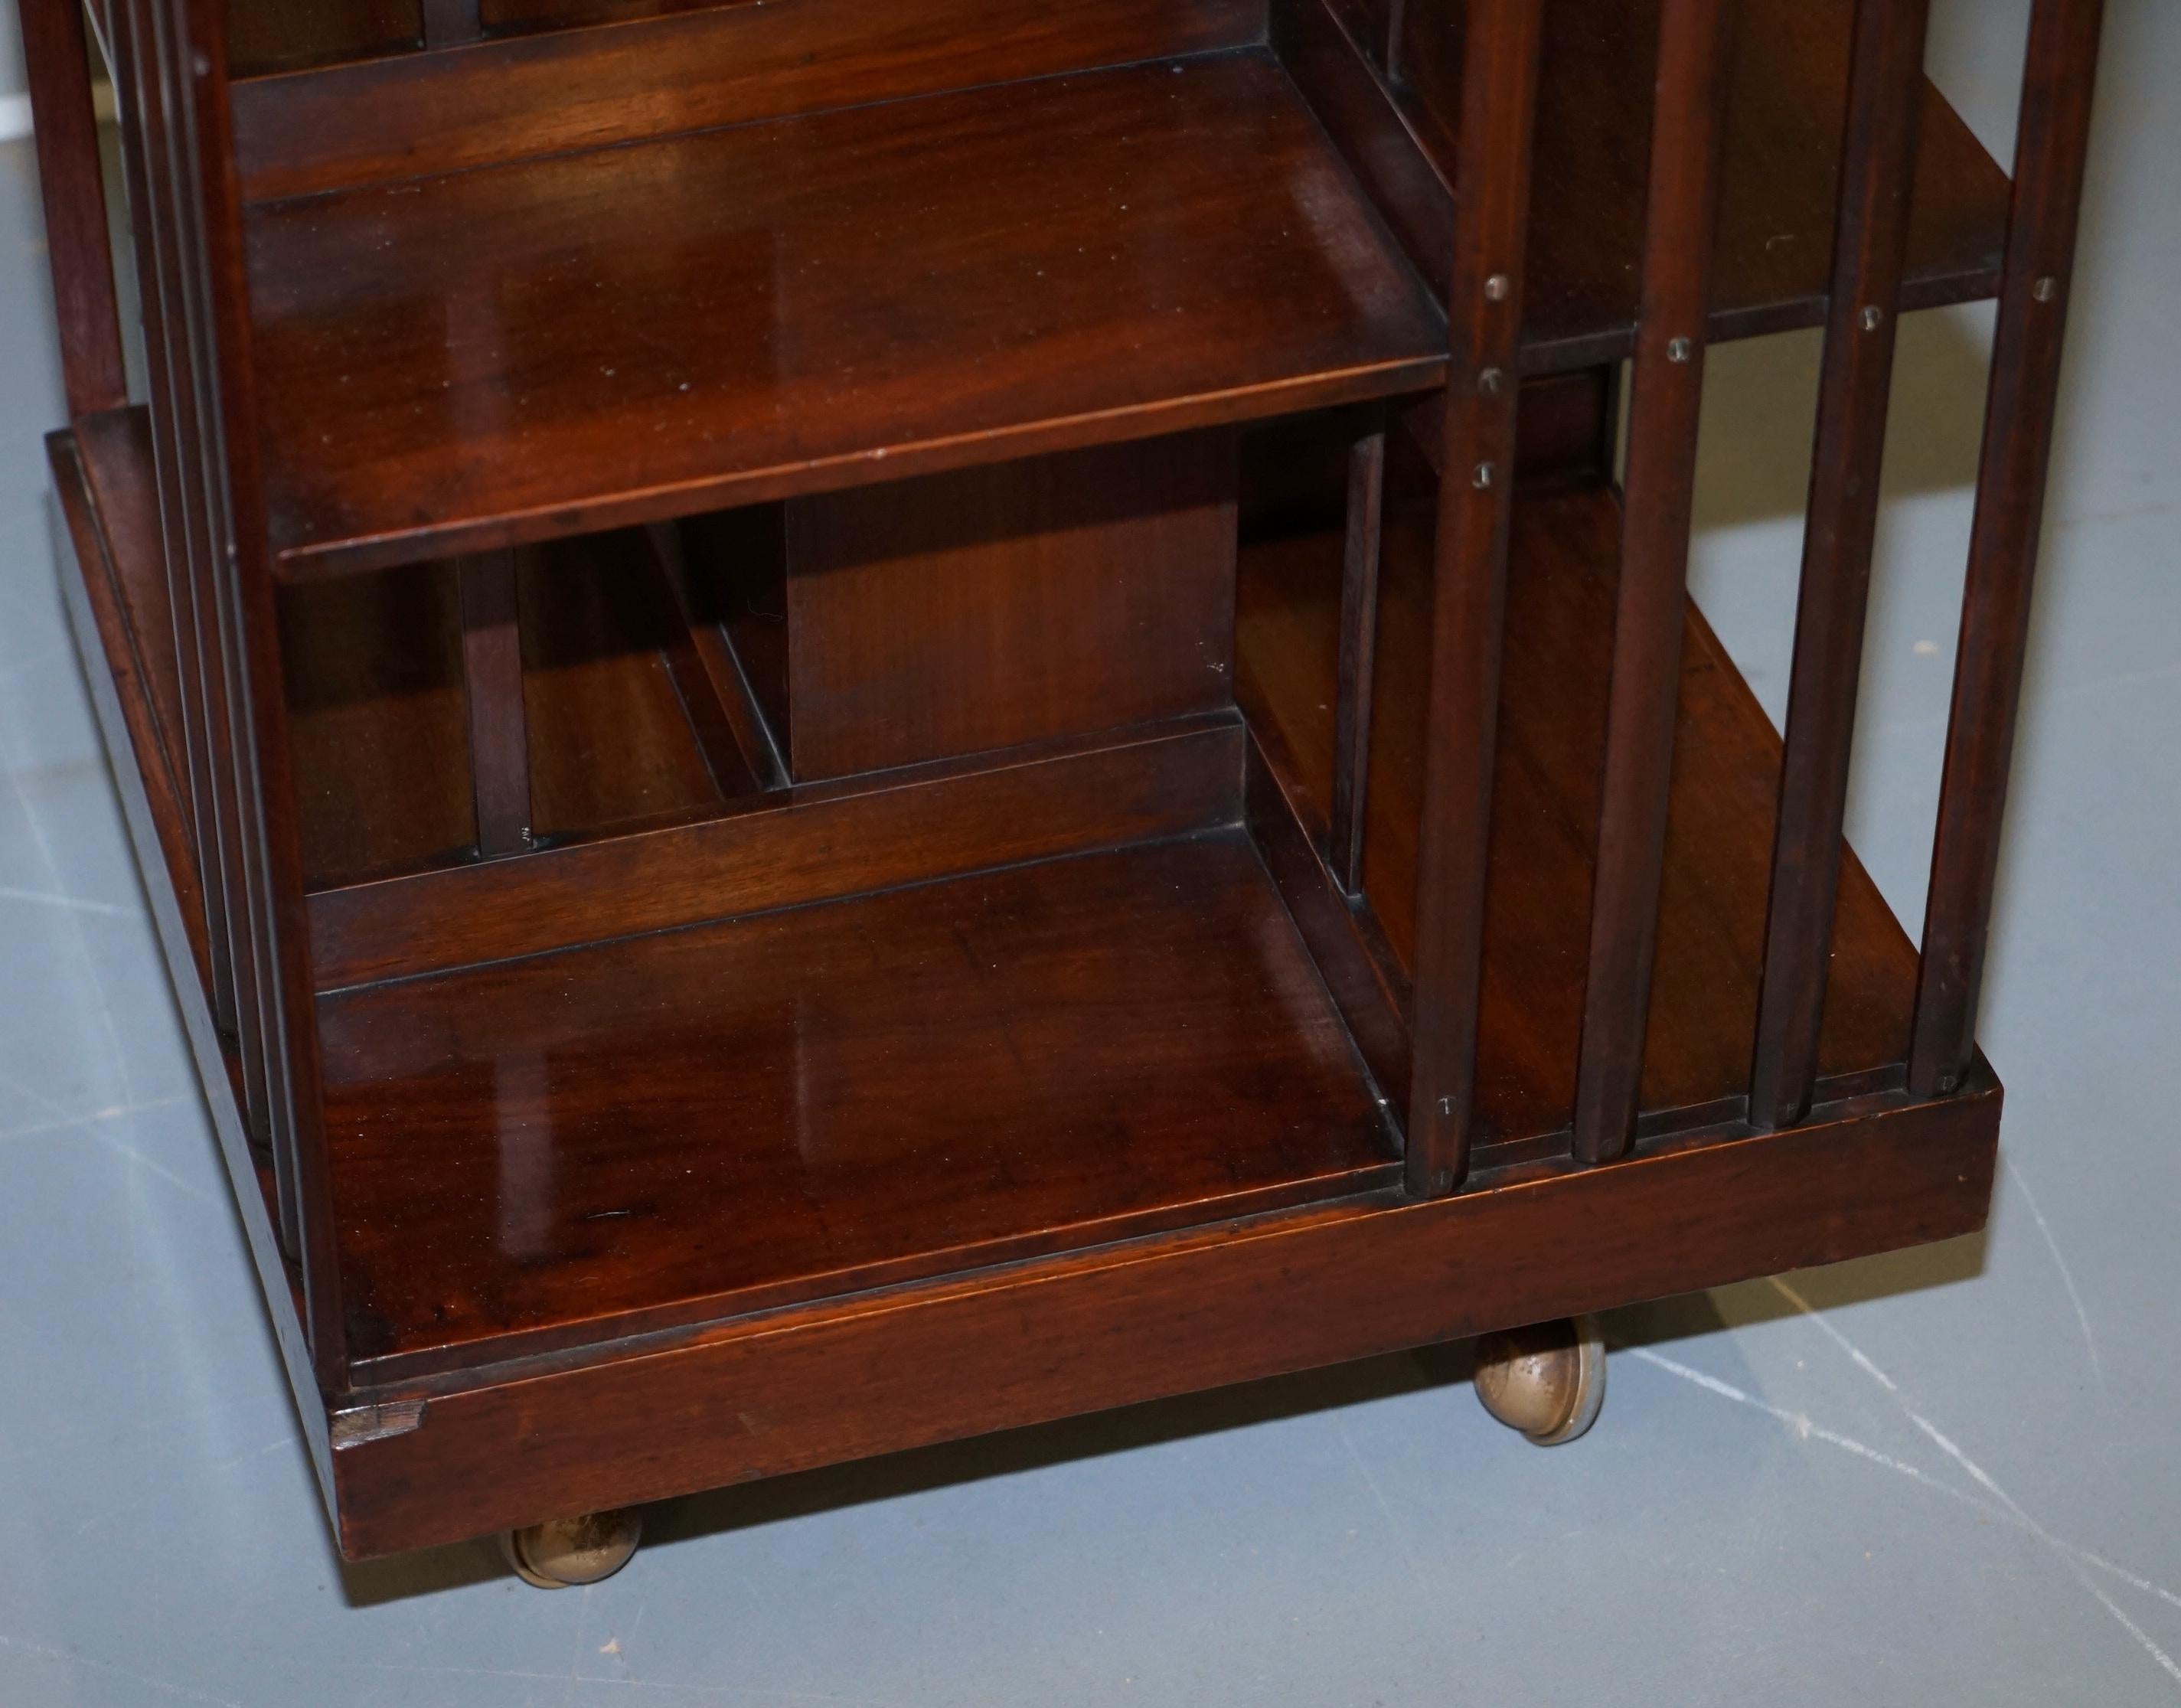 Mahogany Edwardian Revolving Library Bookcase Great Side Table Size on Wheels 2